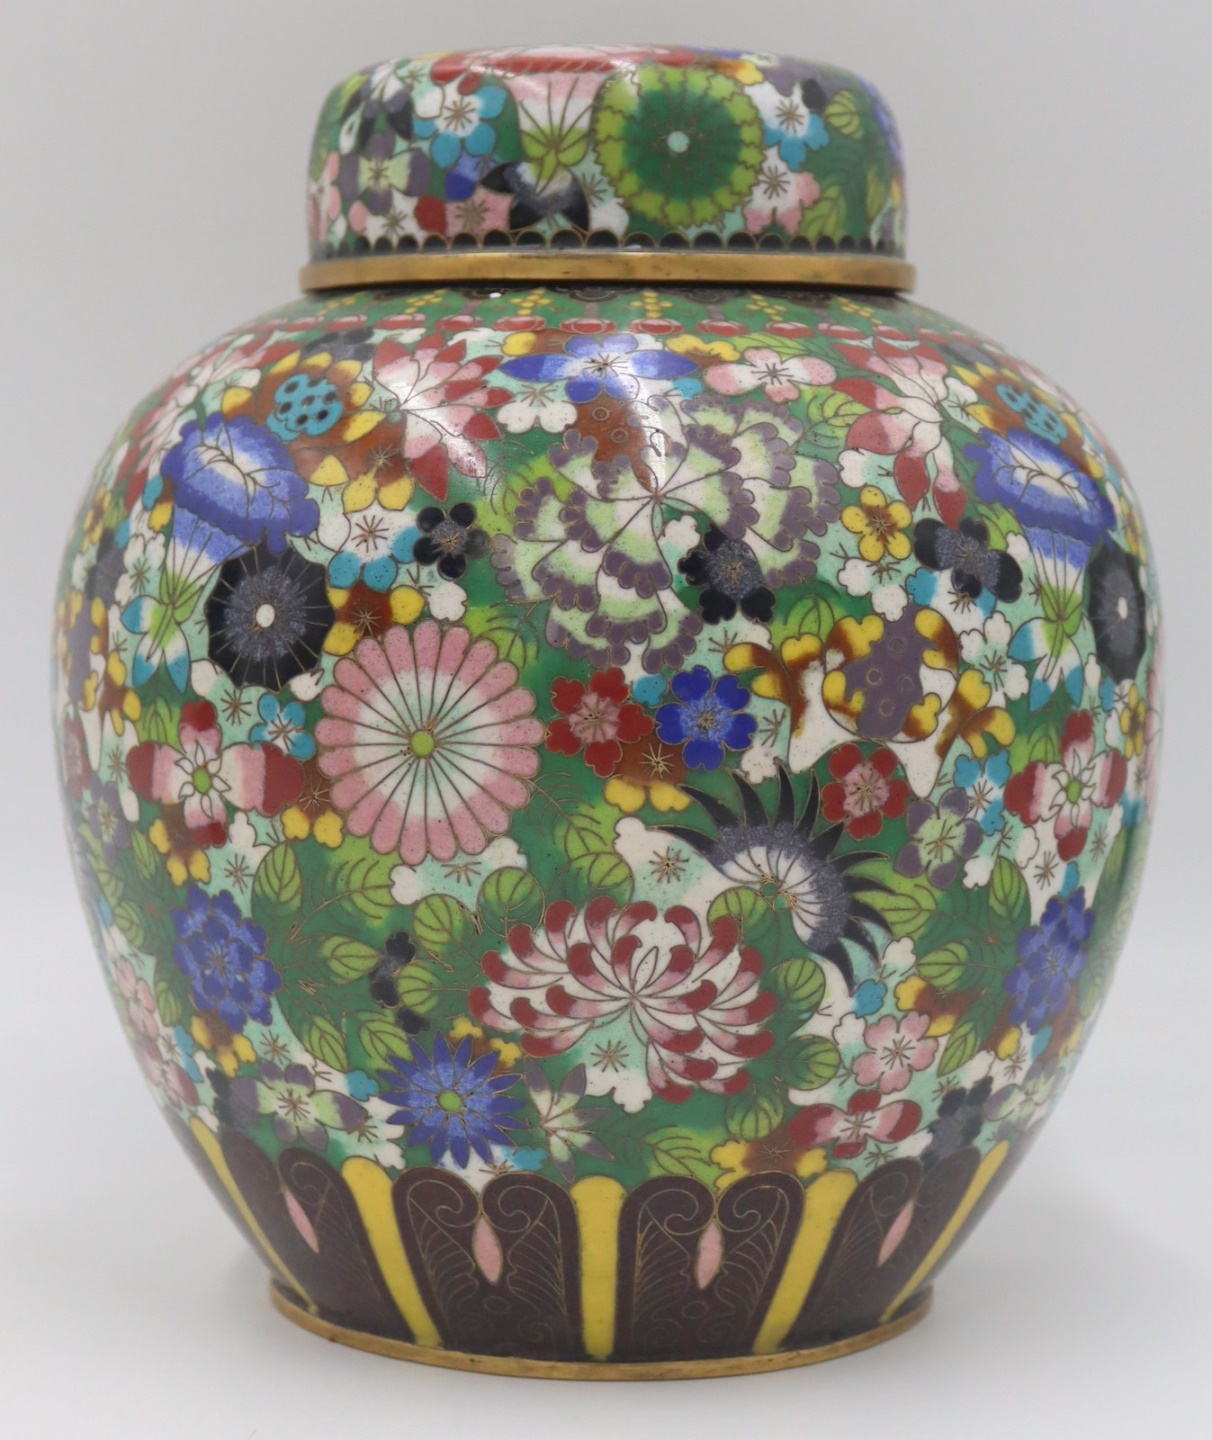 CHINESE CLOISONNE LIDDED JAR. Decorated